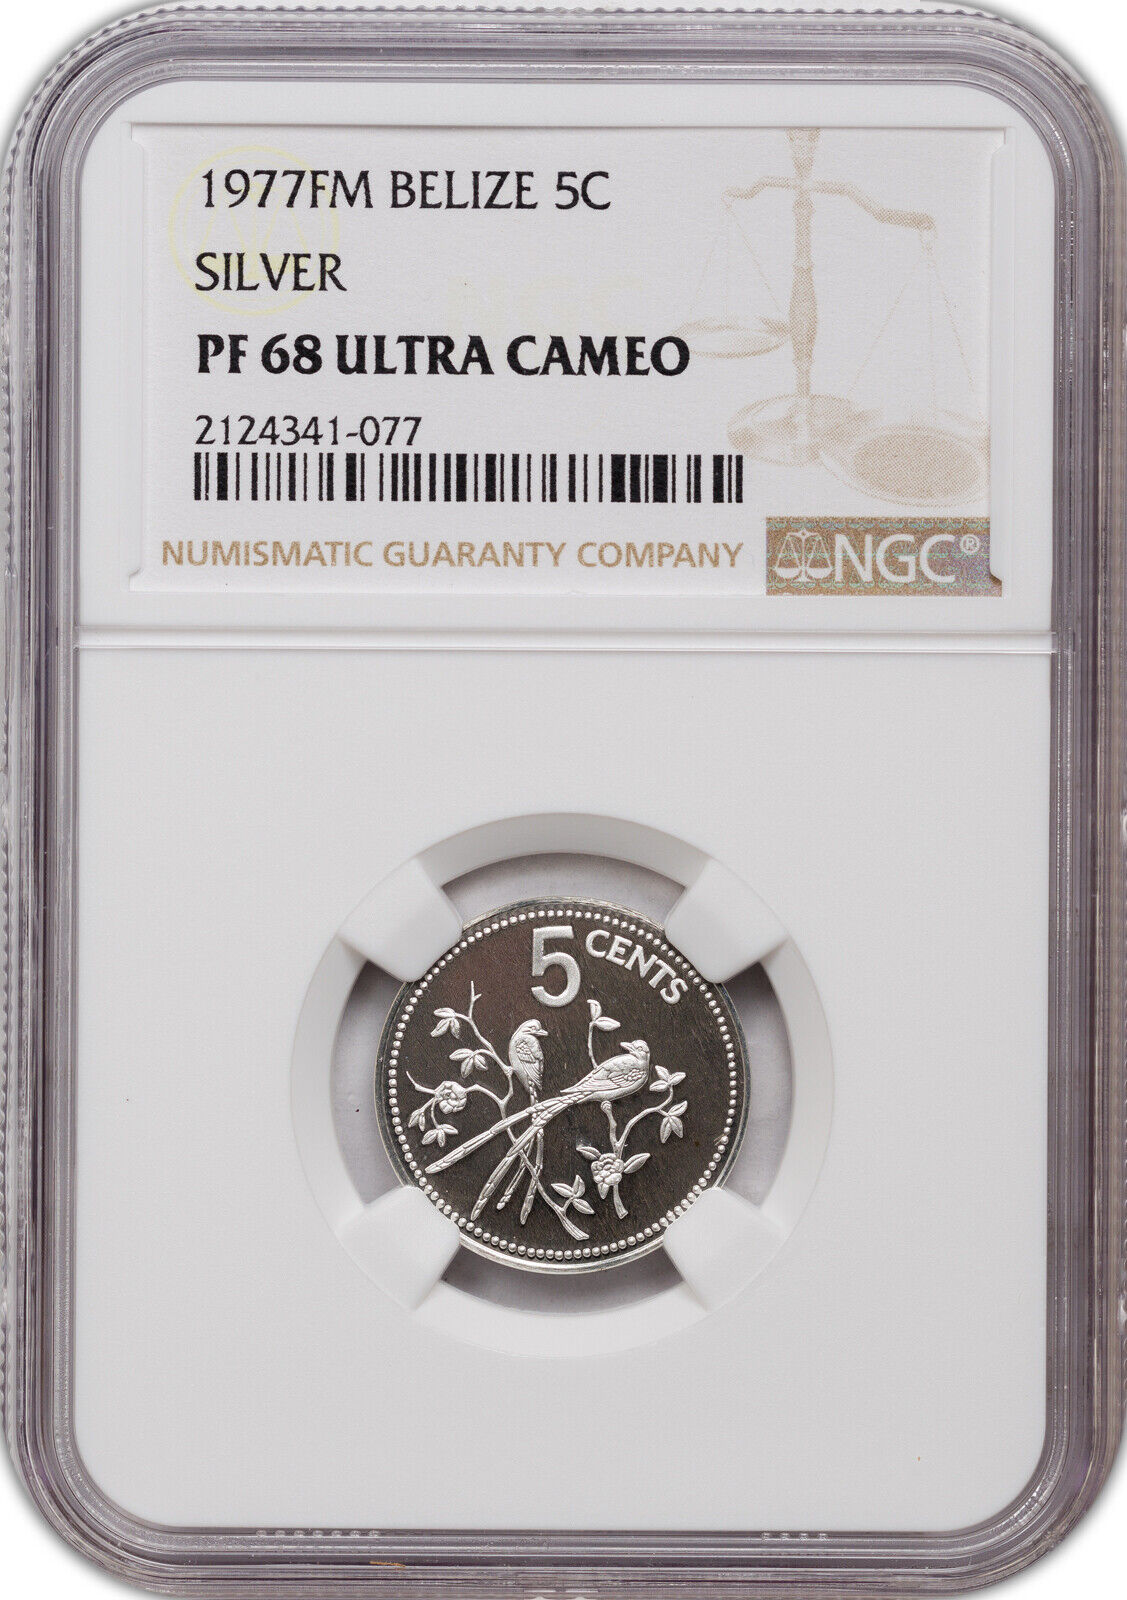 1977-fm Belize Silver 5 Cents Pf 68 Uc Ngc Coin Finest Known